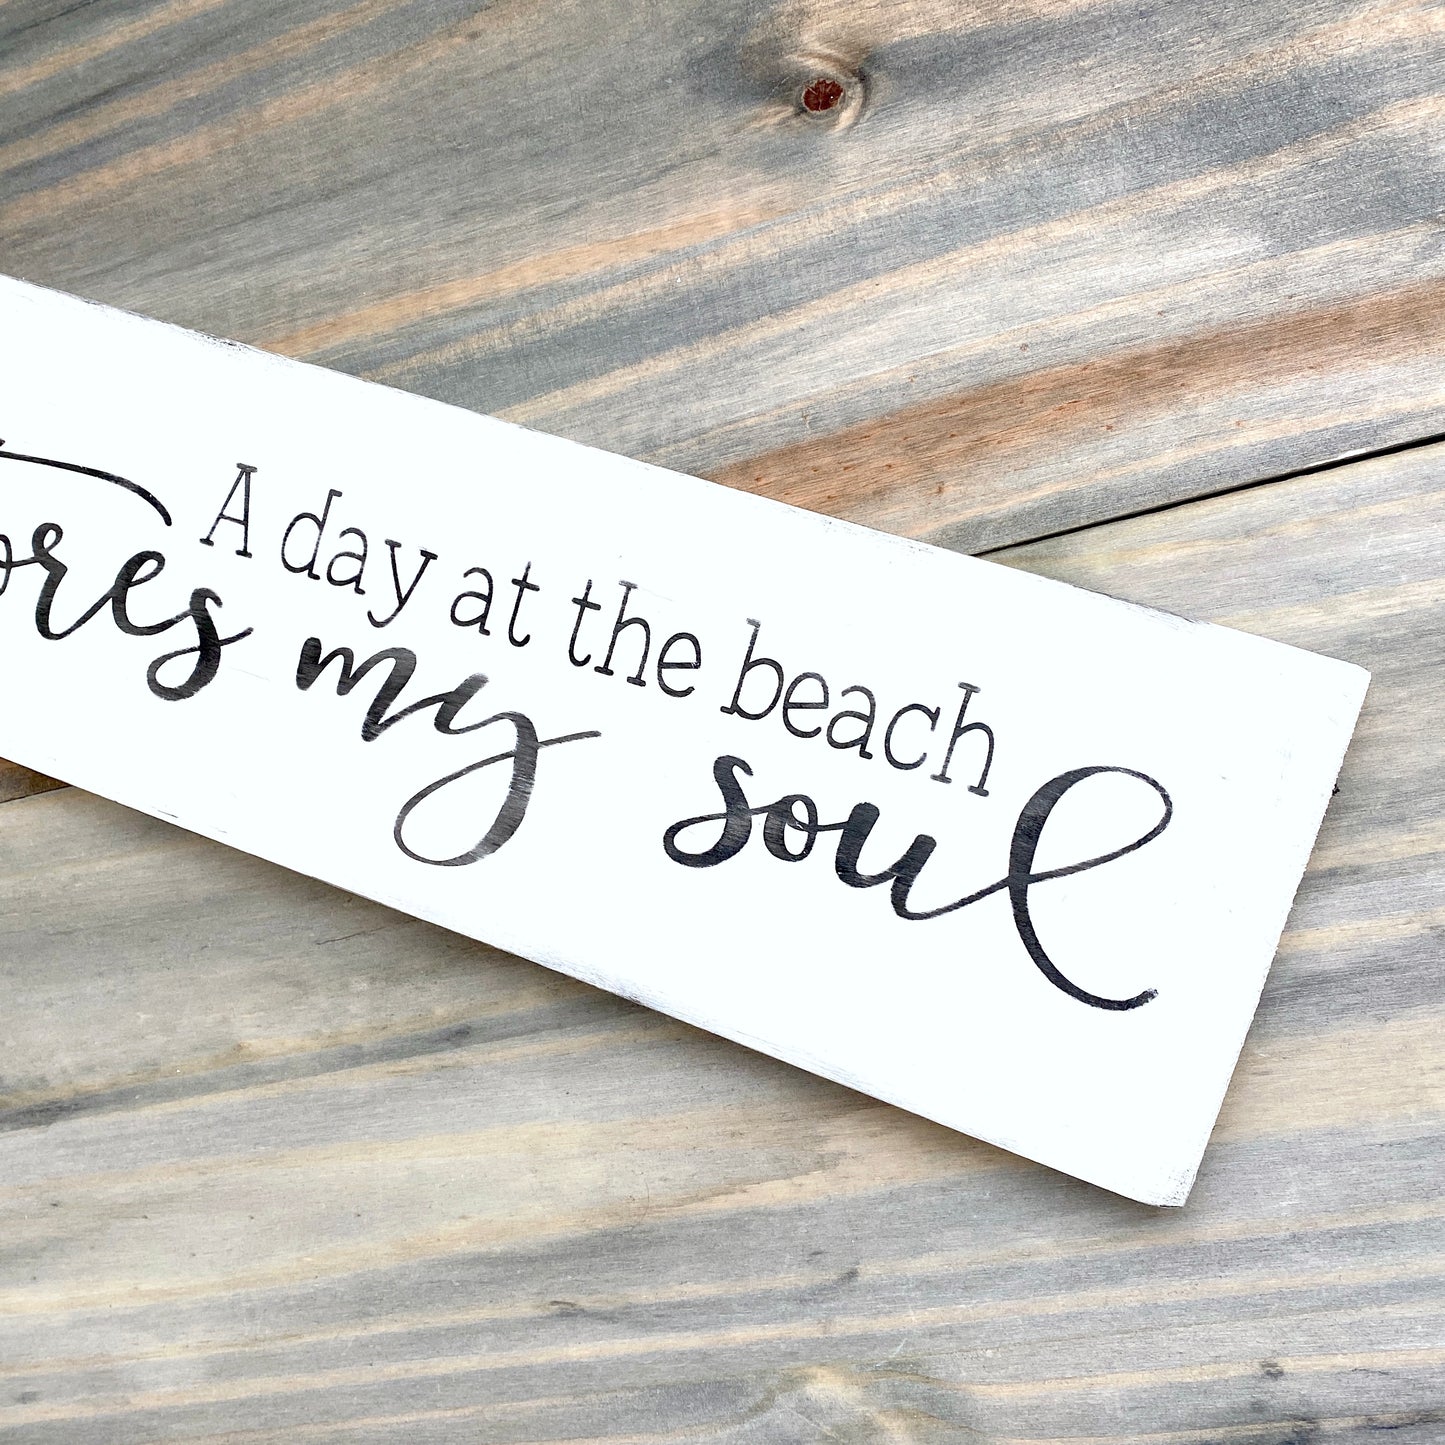 A day at the beach restores my soul sign handpainted on wood coastal home decor for beach house beach lover gift beach decor coastal handmade sign